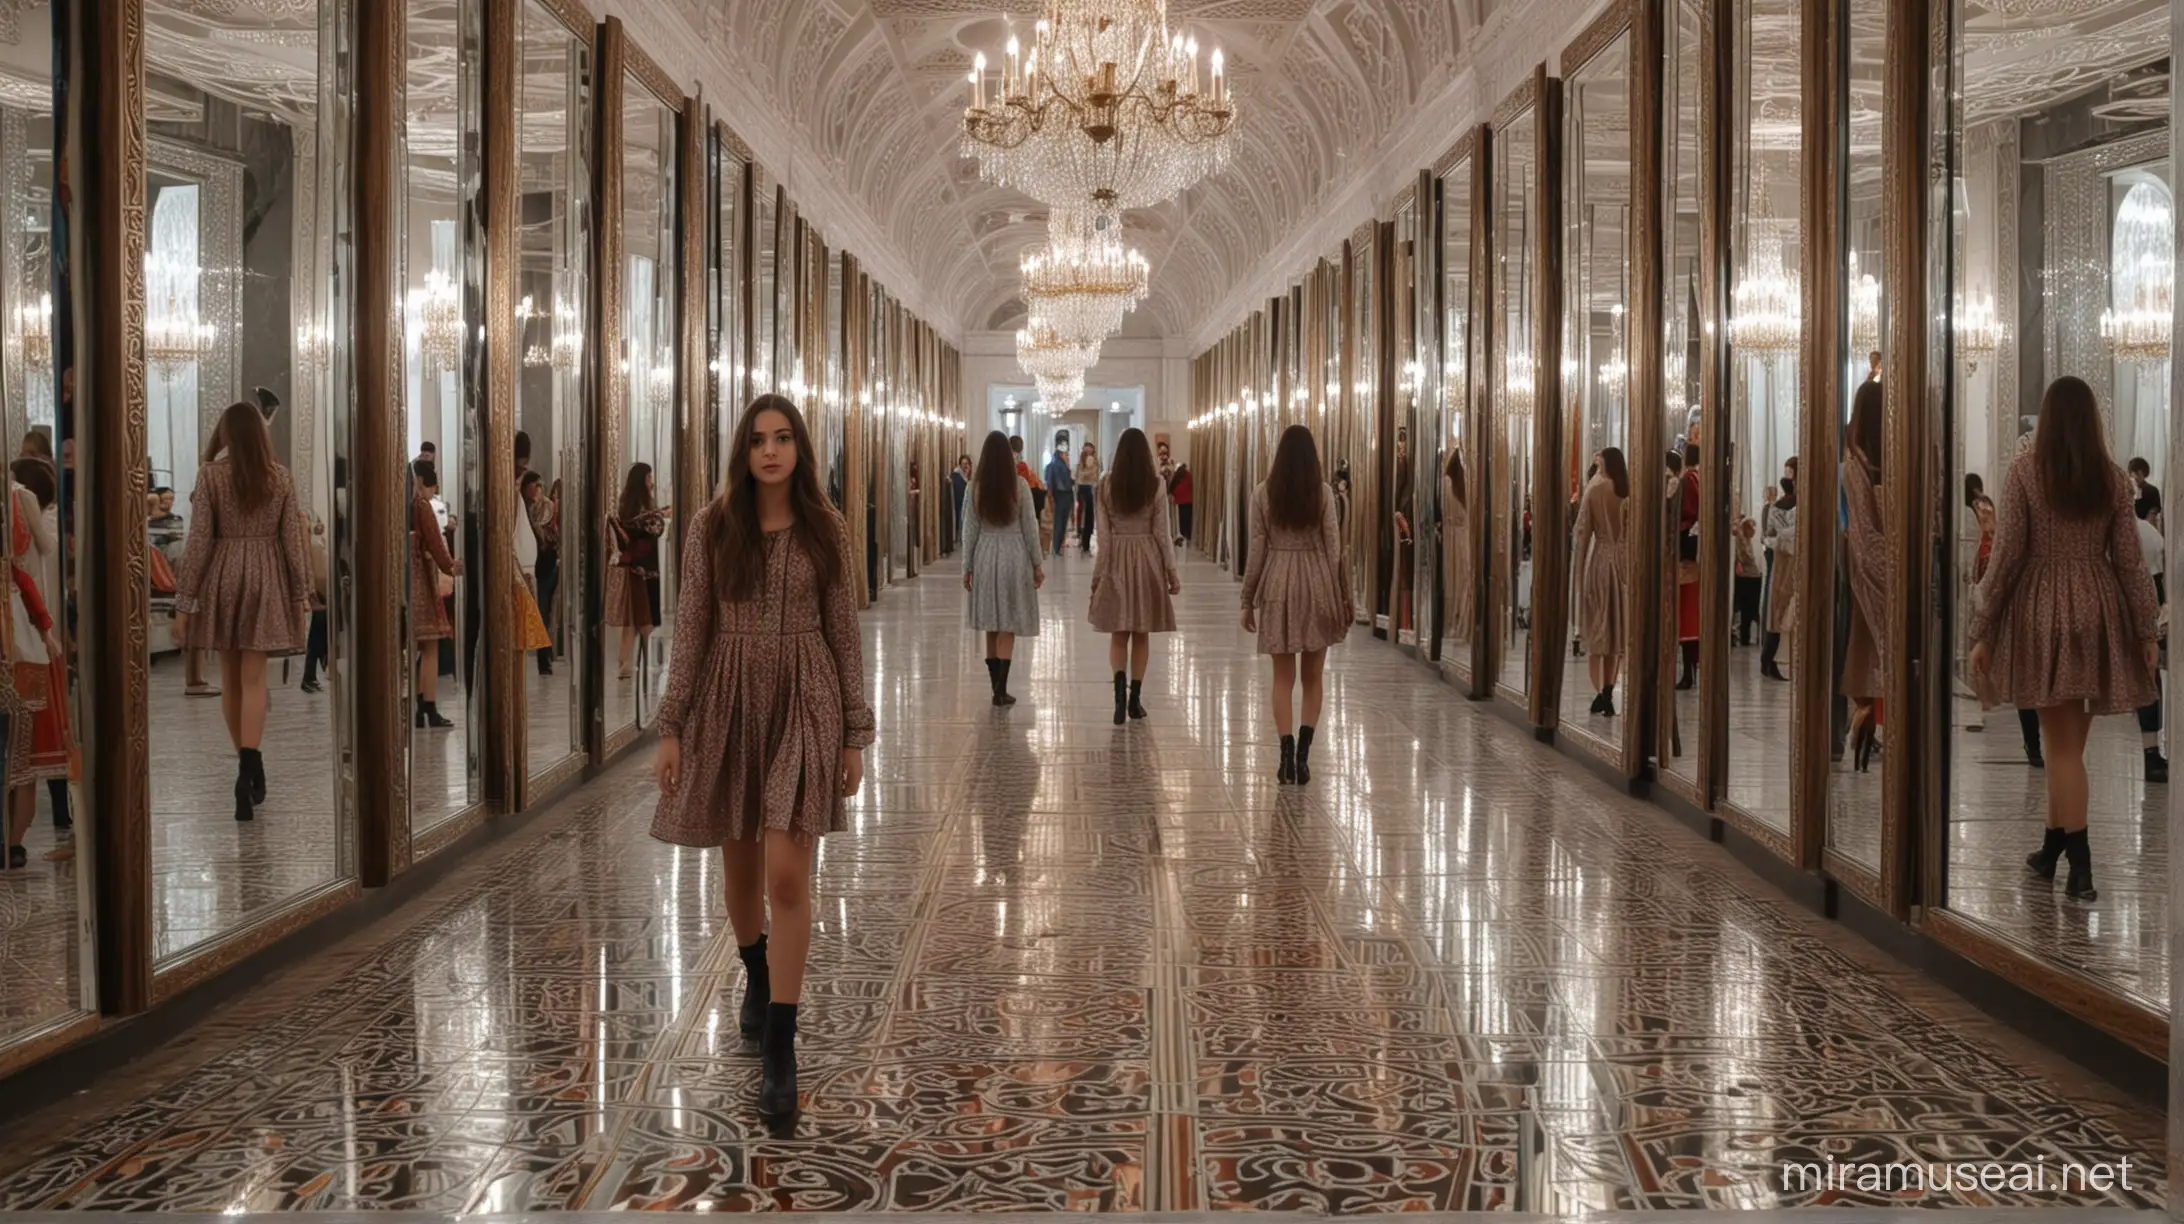 A huge hallway like mirrors maze room, there are many more huge Mirrors, show at reflection of same Turkish Girl with different angles on that mirrors, some mirrors show the front of girl, and some mirrors show the back of girl, That Beautiful Turkish Girl, wearing traditional fully covered dressed, walking in this maze room,